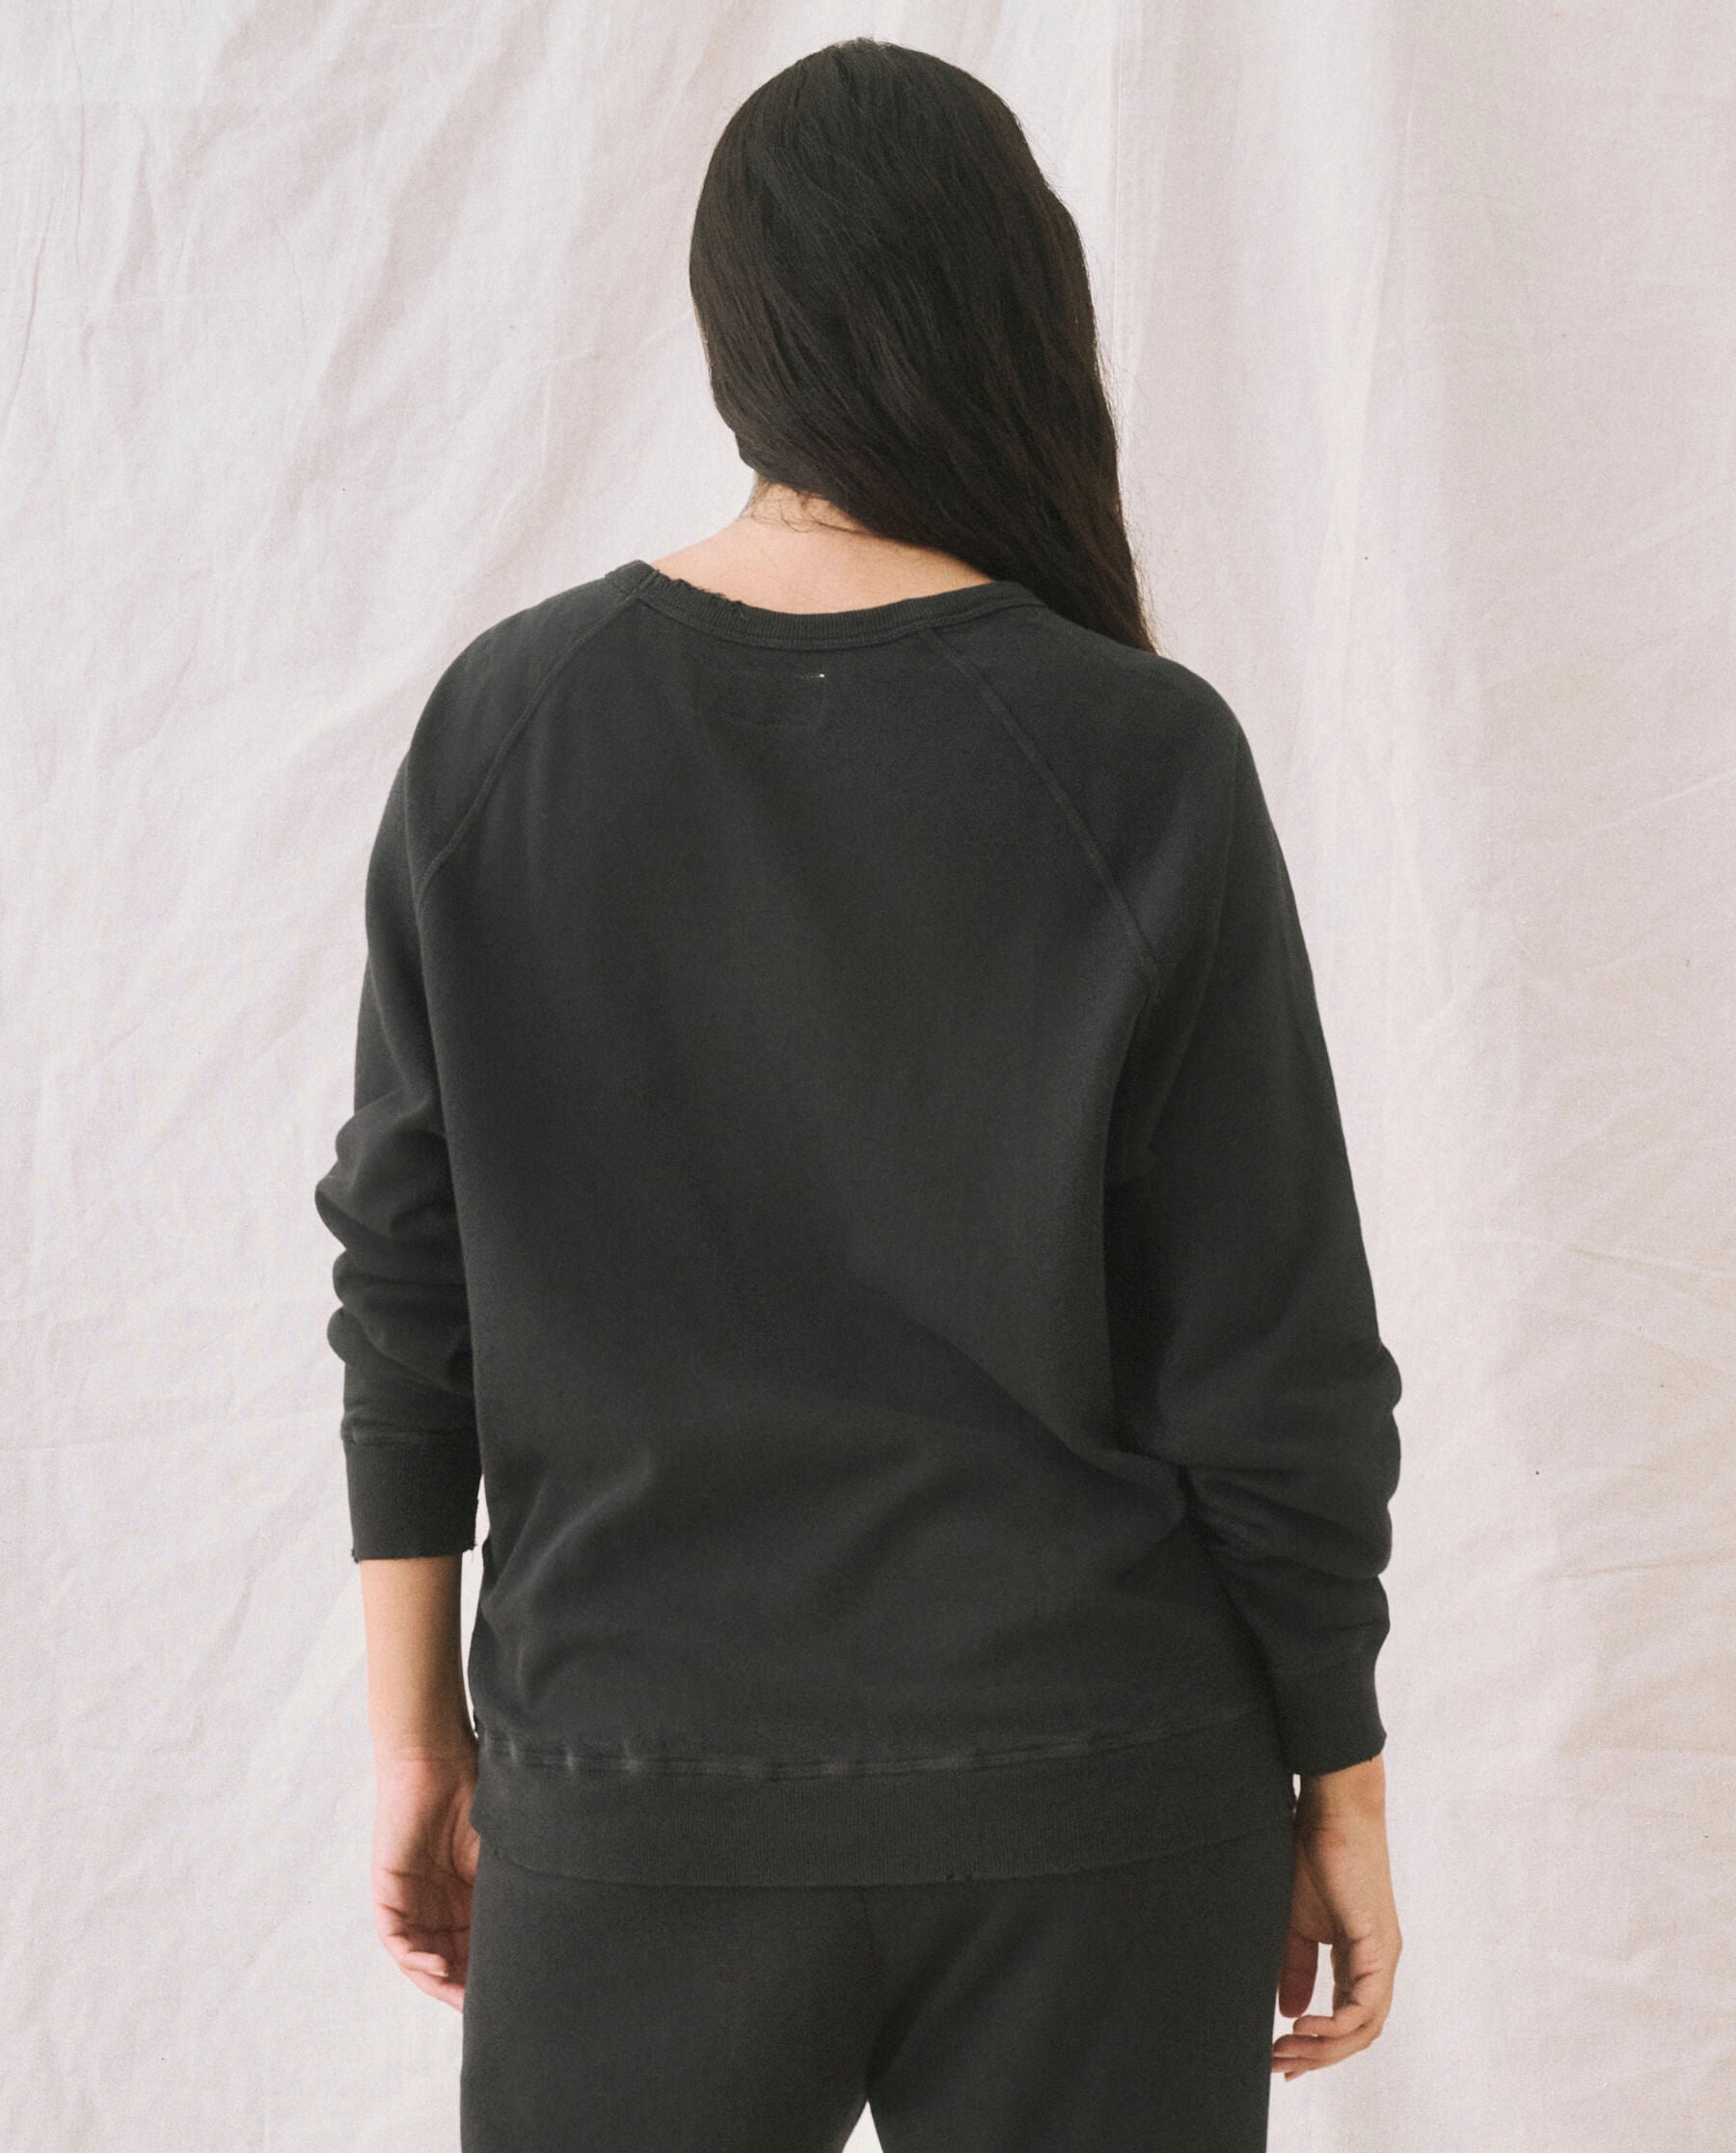 The College Sweatshirt. Solid -- Almost Black SWEATSHIRTS THE GREAT. CORE KNITS